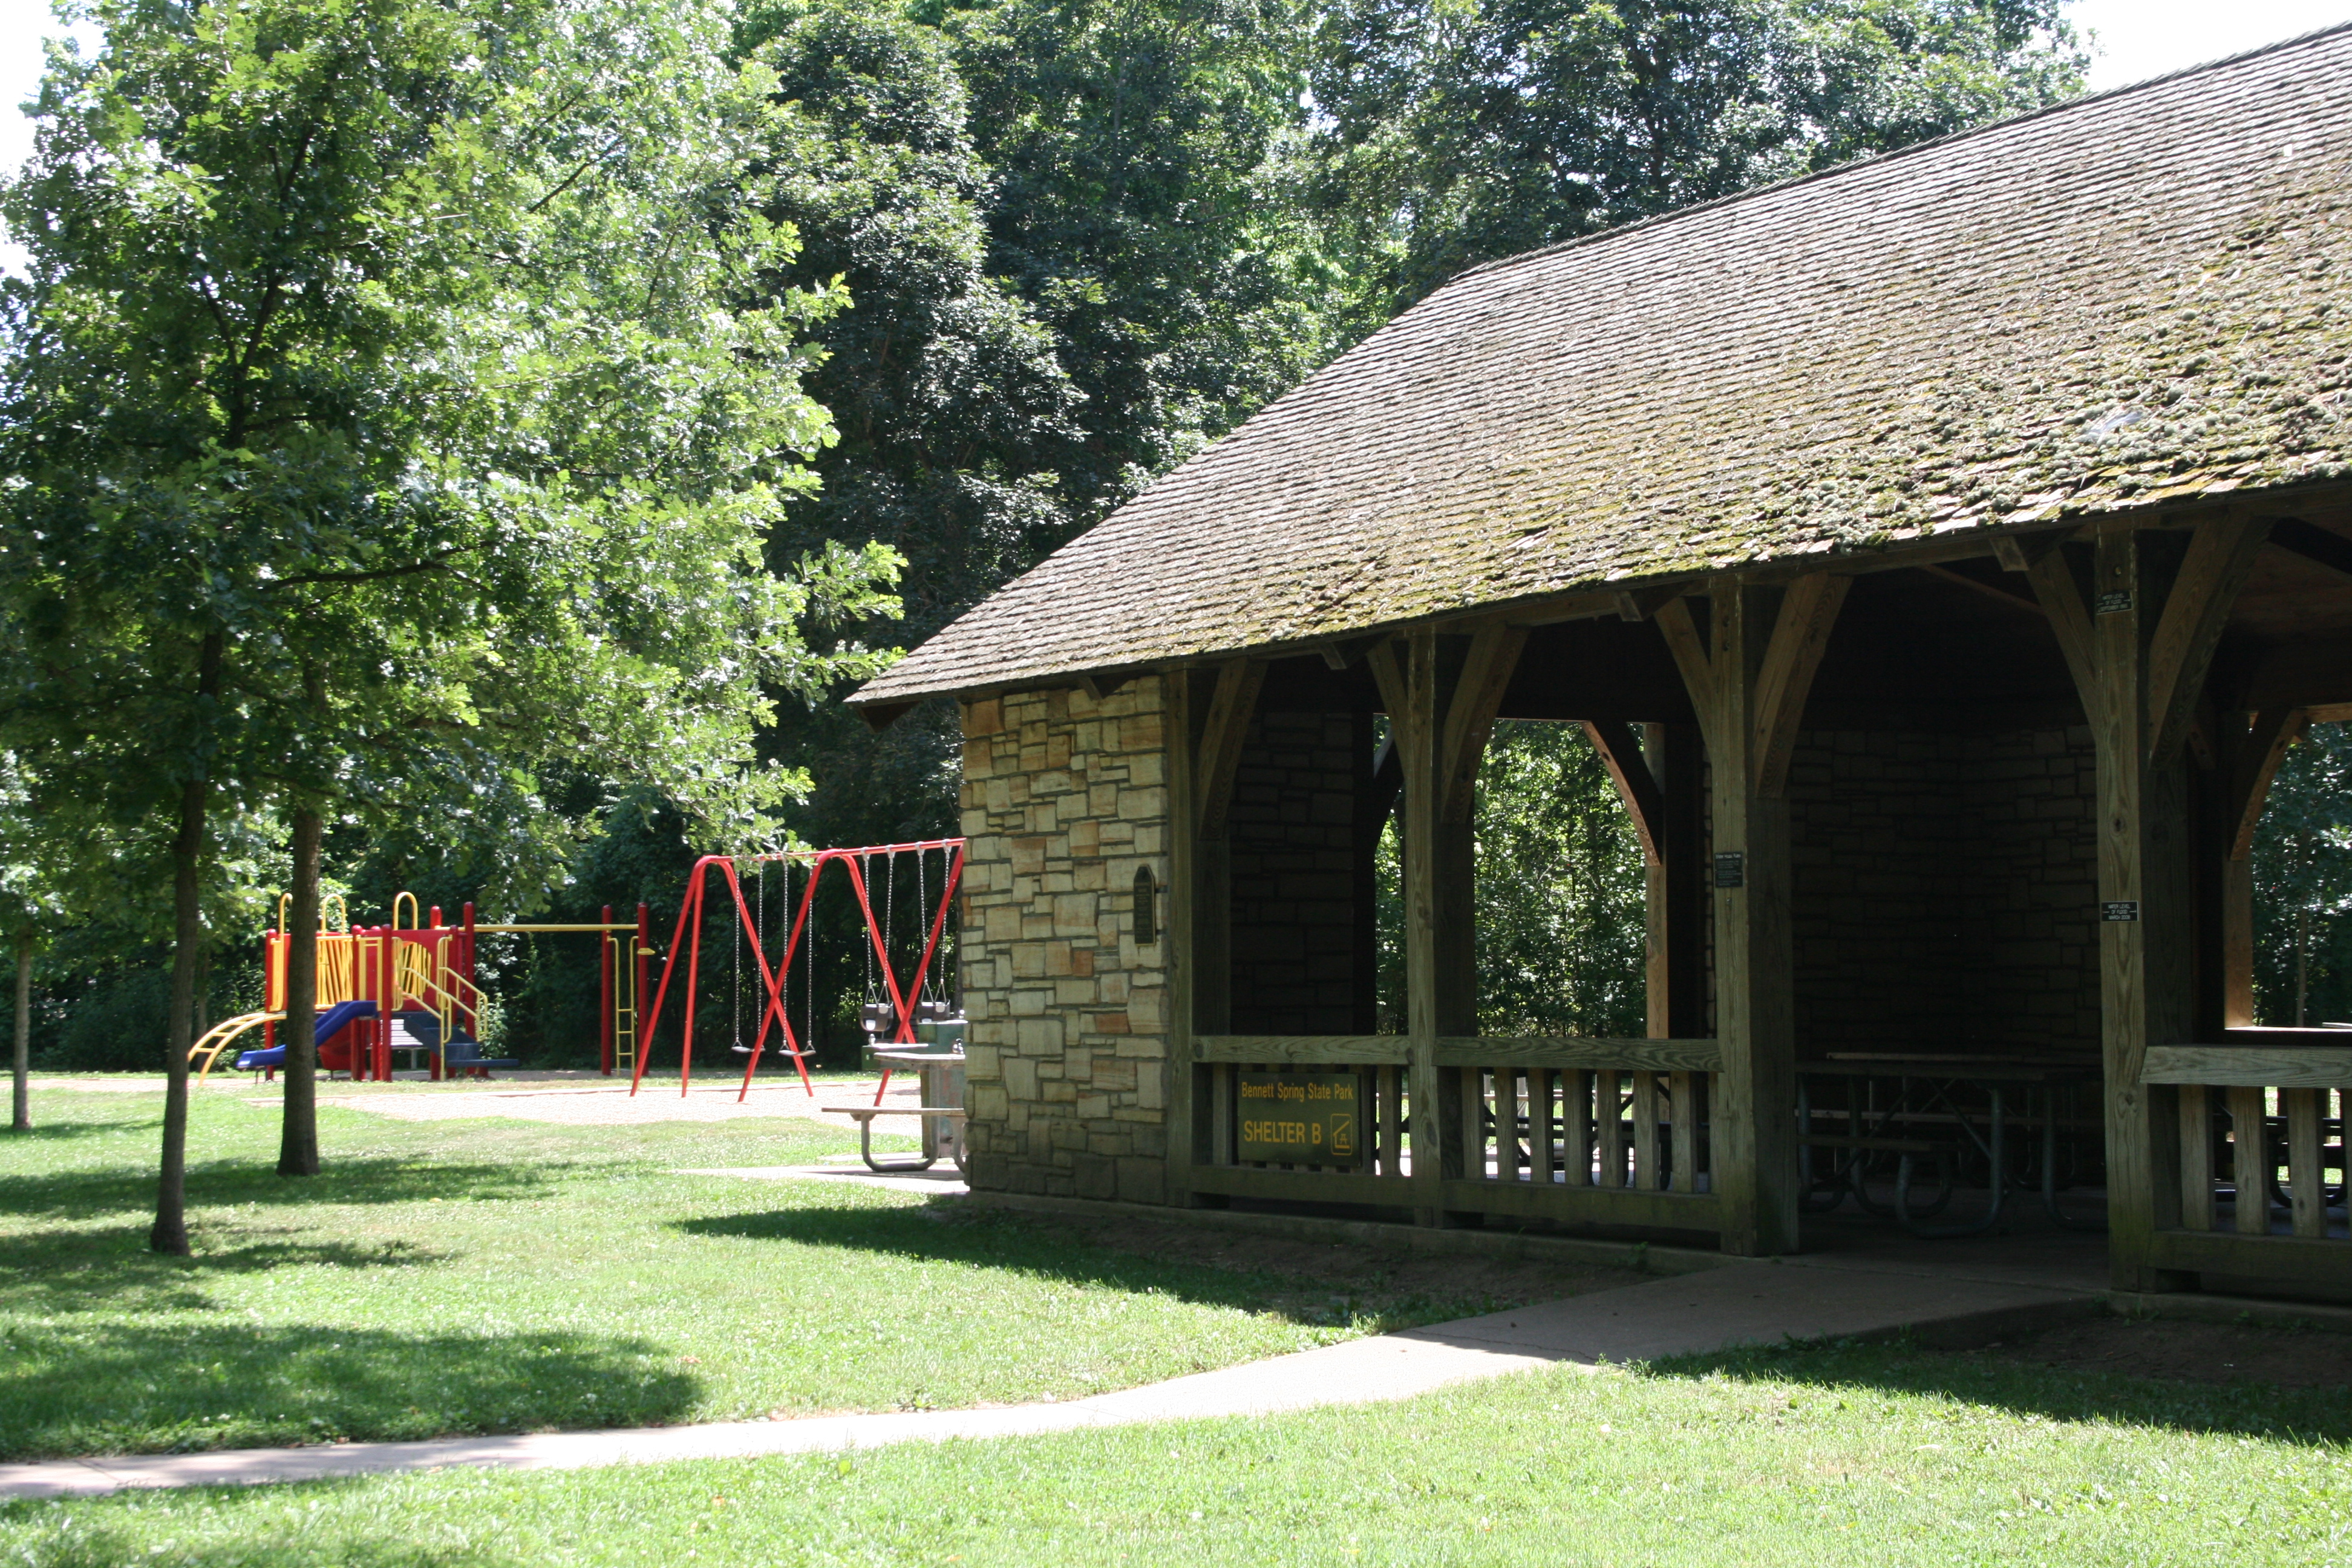 rock picnic shelter with playground in background